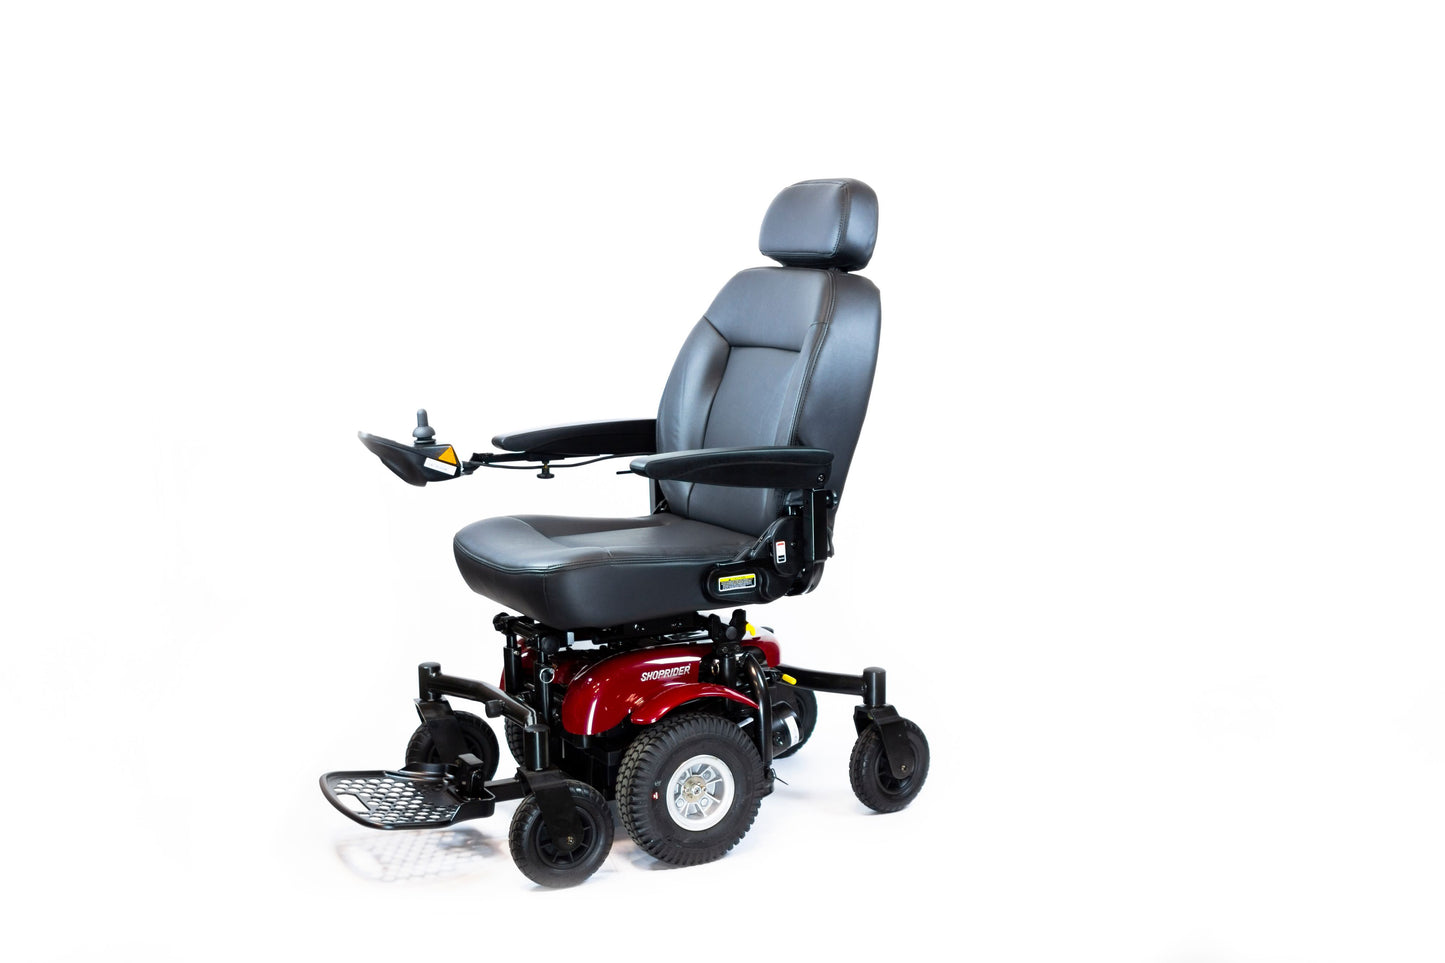 Shoprider 6Runner 10 Power Wheelchair Red - Added Suspension For Smooth and Comfortable Ride